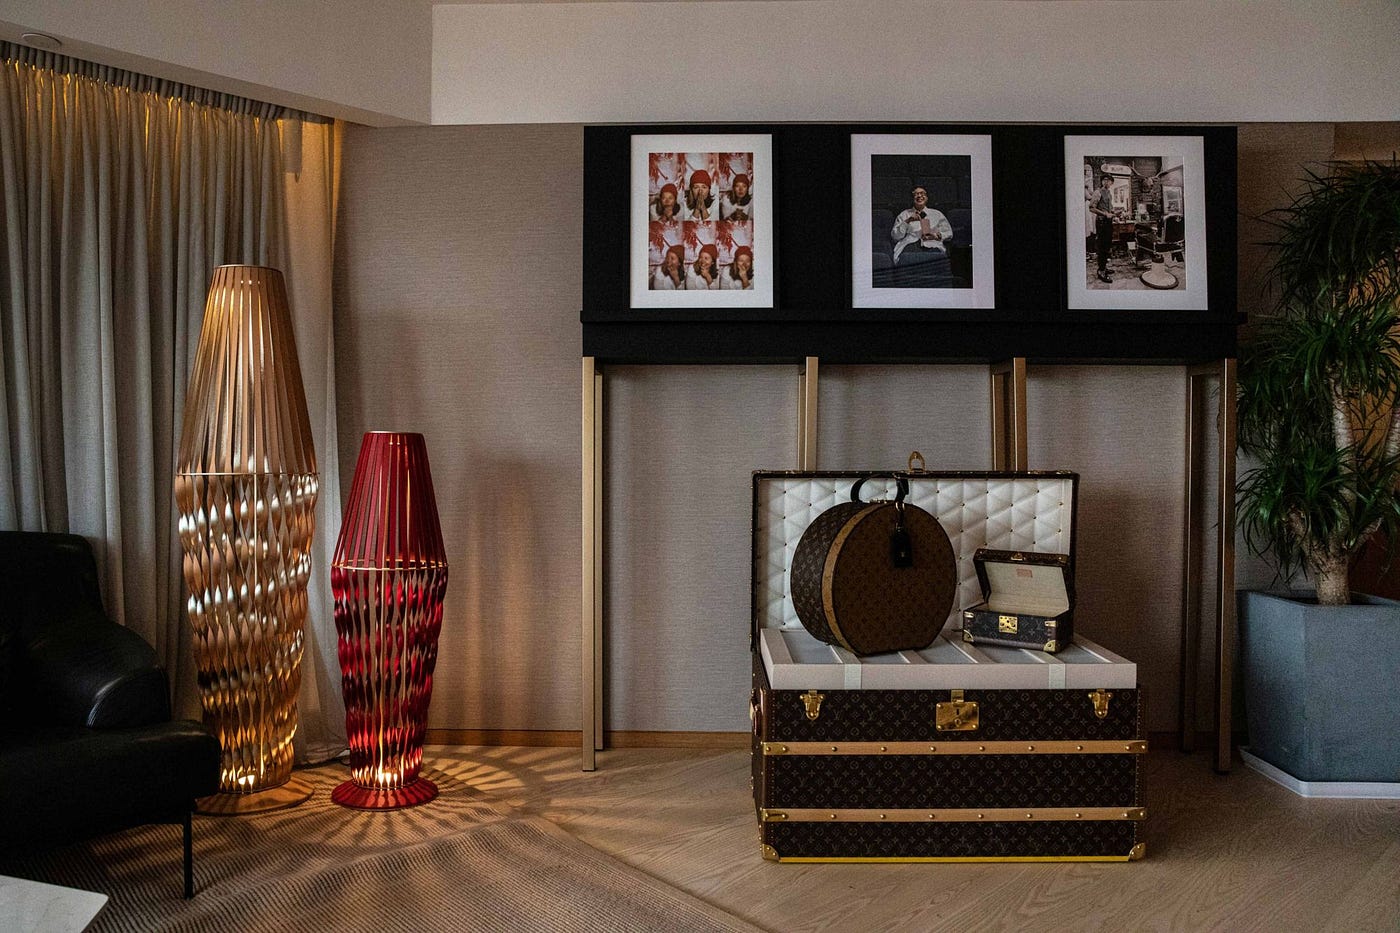 5 Tips for decorating with a Louis Vuitton theme